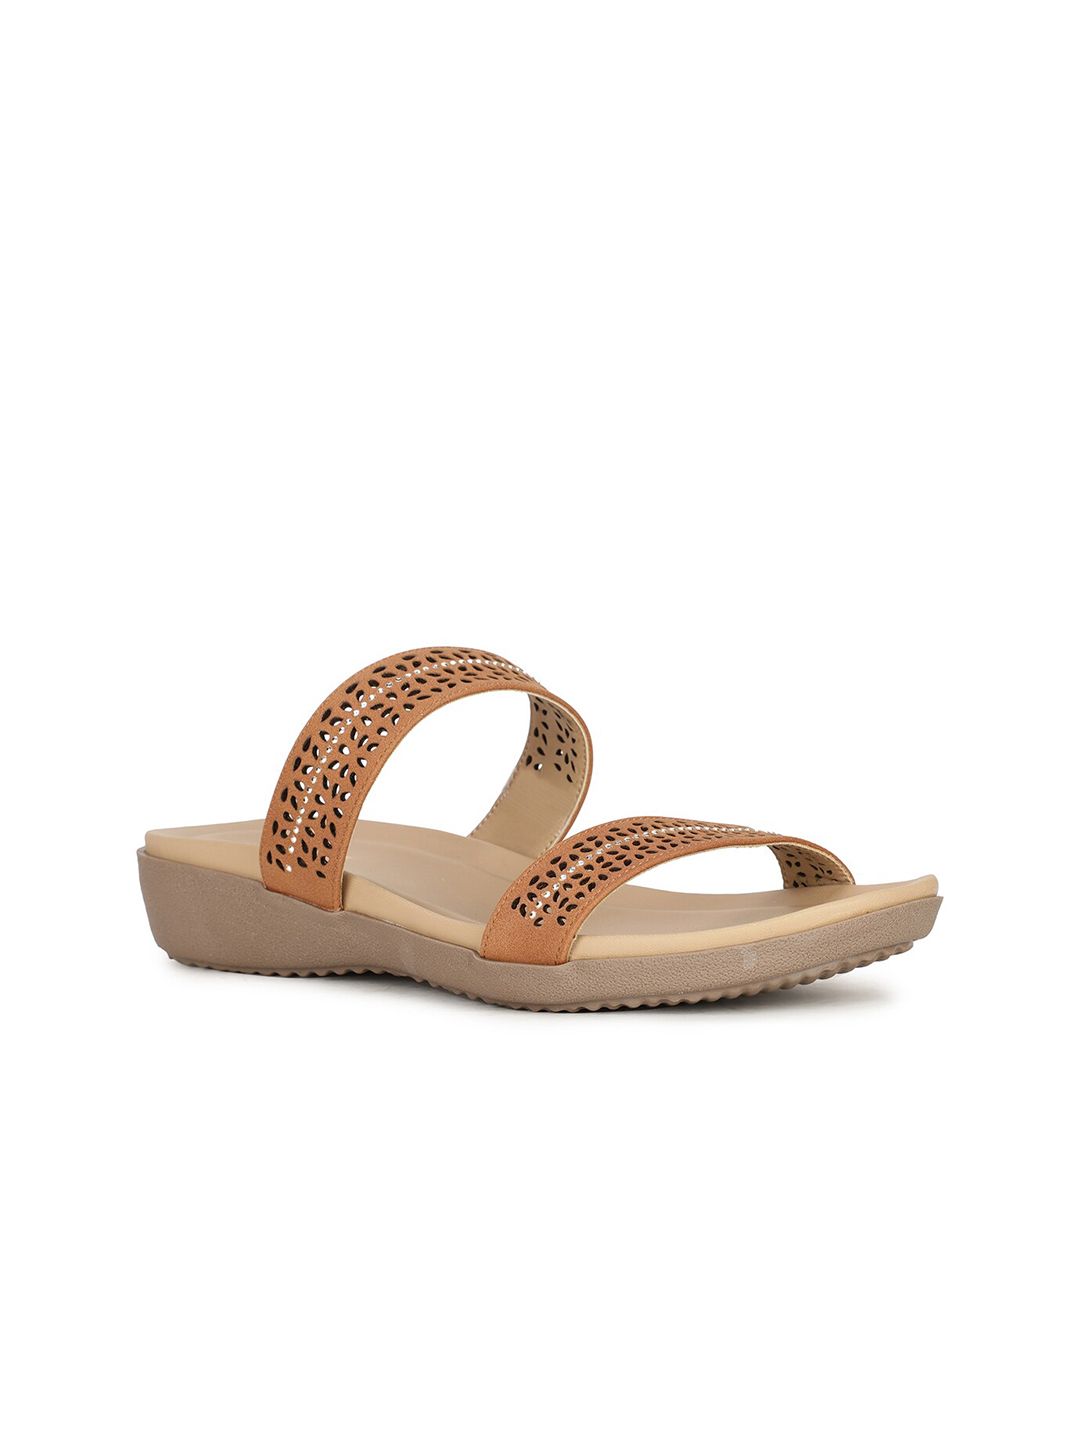 Bata Tan & Beige Open Toe Flats with Laser Cuts Price in India